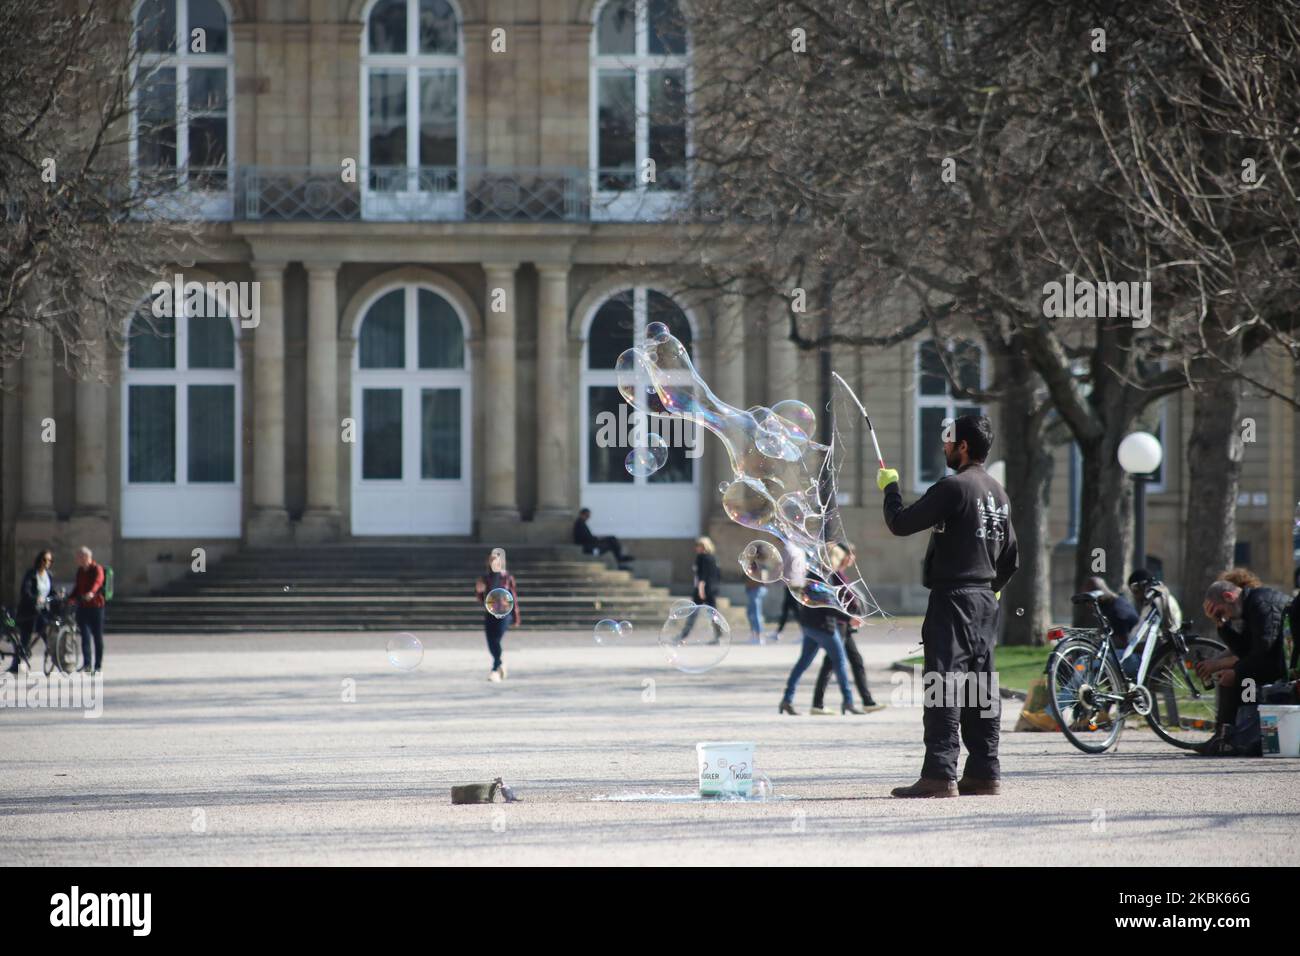 A man releases shampoo bubbles in the center of Stuttgart, southern Germany on March 18, 2020.German leaders urged citizens to stay home, as the government announced unprecedented nationwide measures to radically scale back public life in order to slow the spread of the coronavirus. (Photo by Agron Beqiri/NurPhoto) Stock Photo